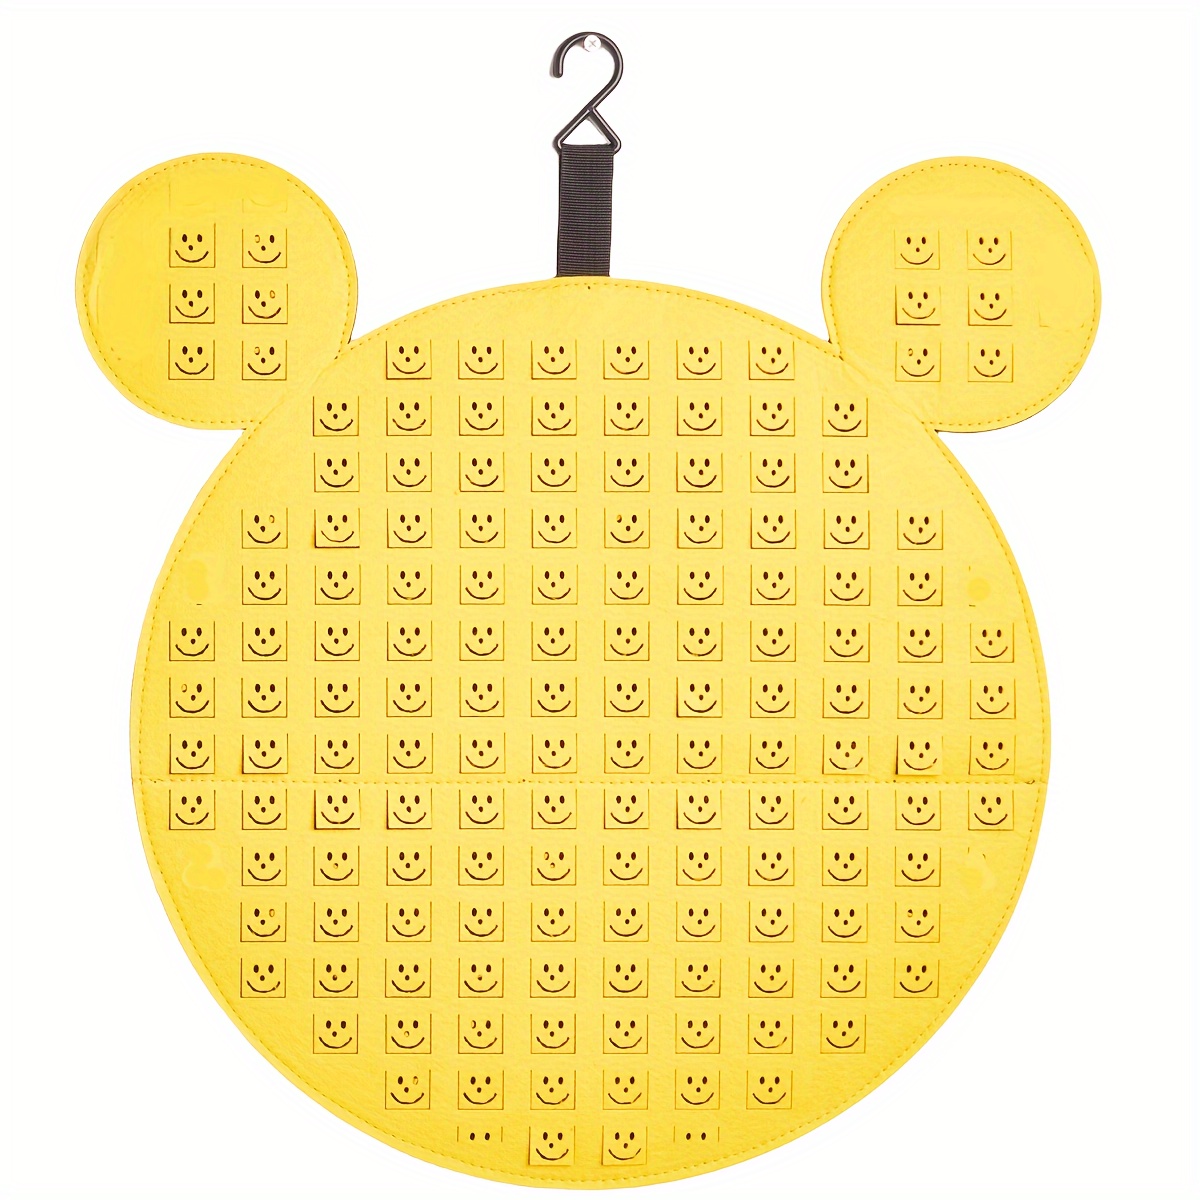  Enamel Pin Display Book, Portable Pin Holder, to Display and  Trade Your Disney Pins, 42 Pin Capacity, Fits Rubber Pin Back, Yellow :  Office Products